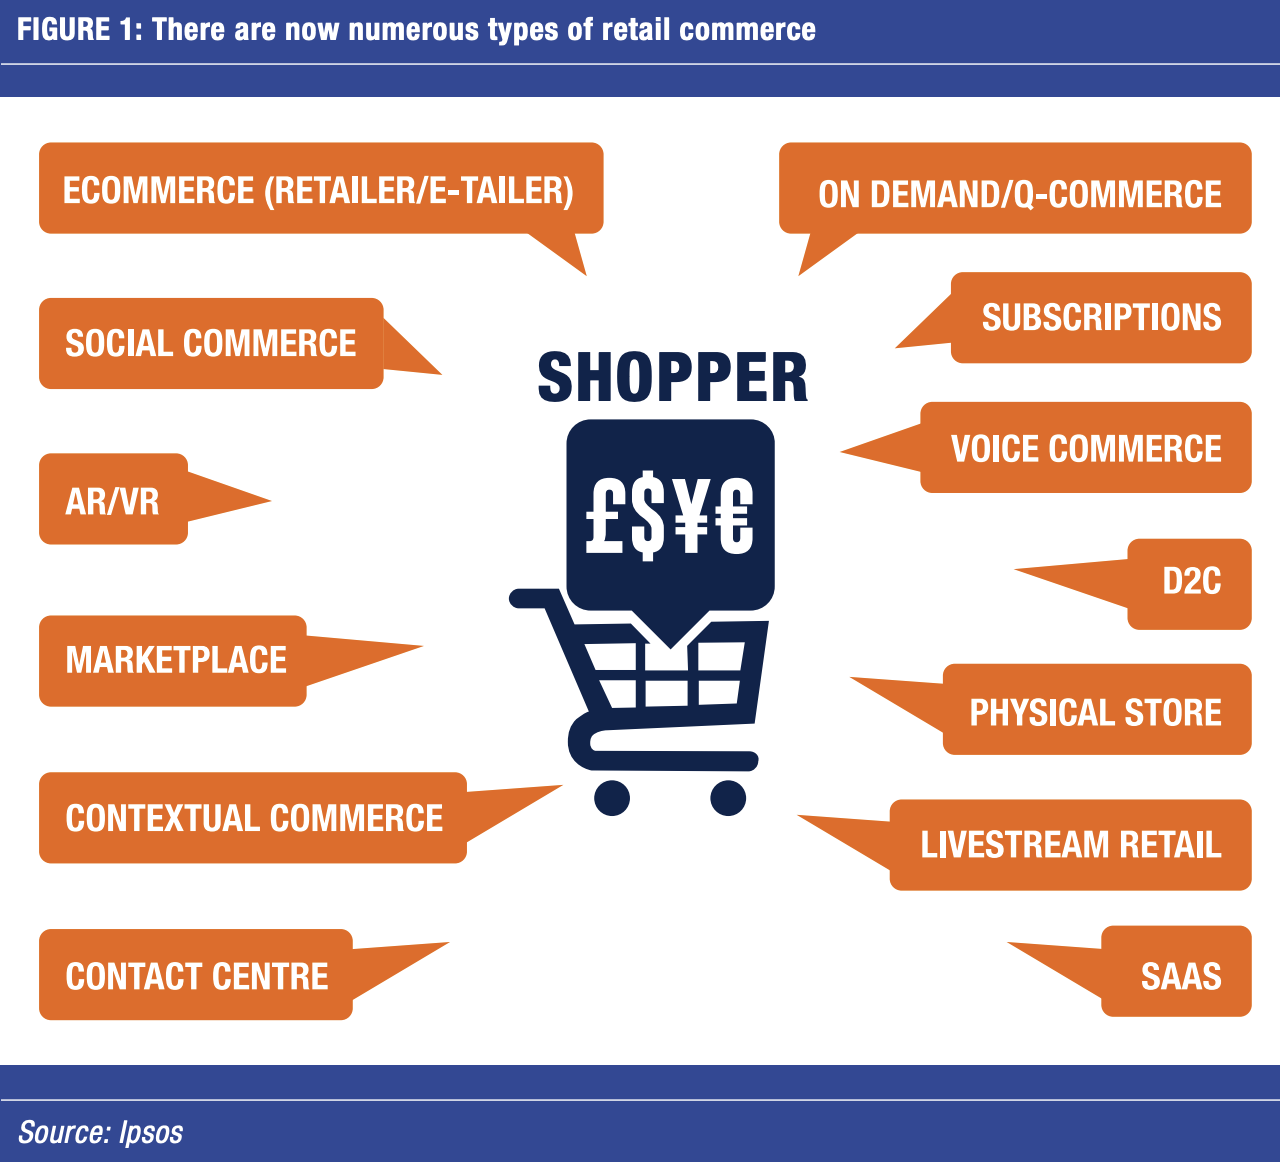 There are now numerous types of retail commerce